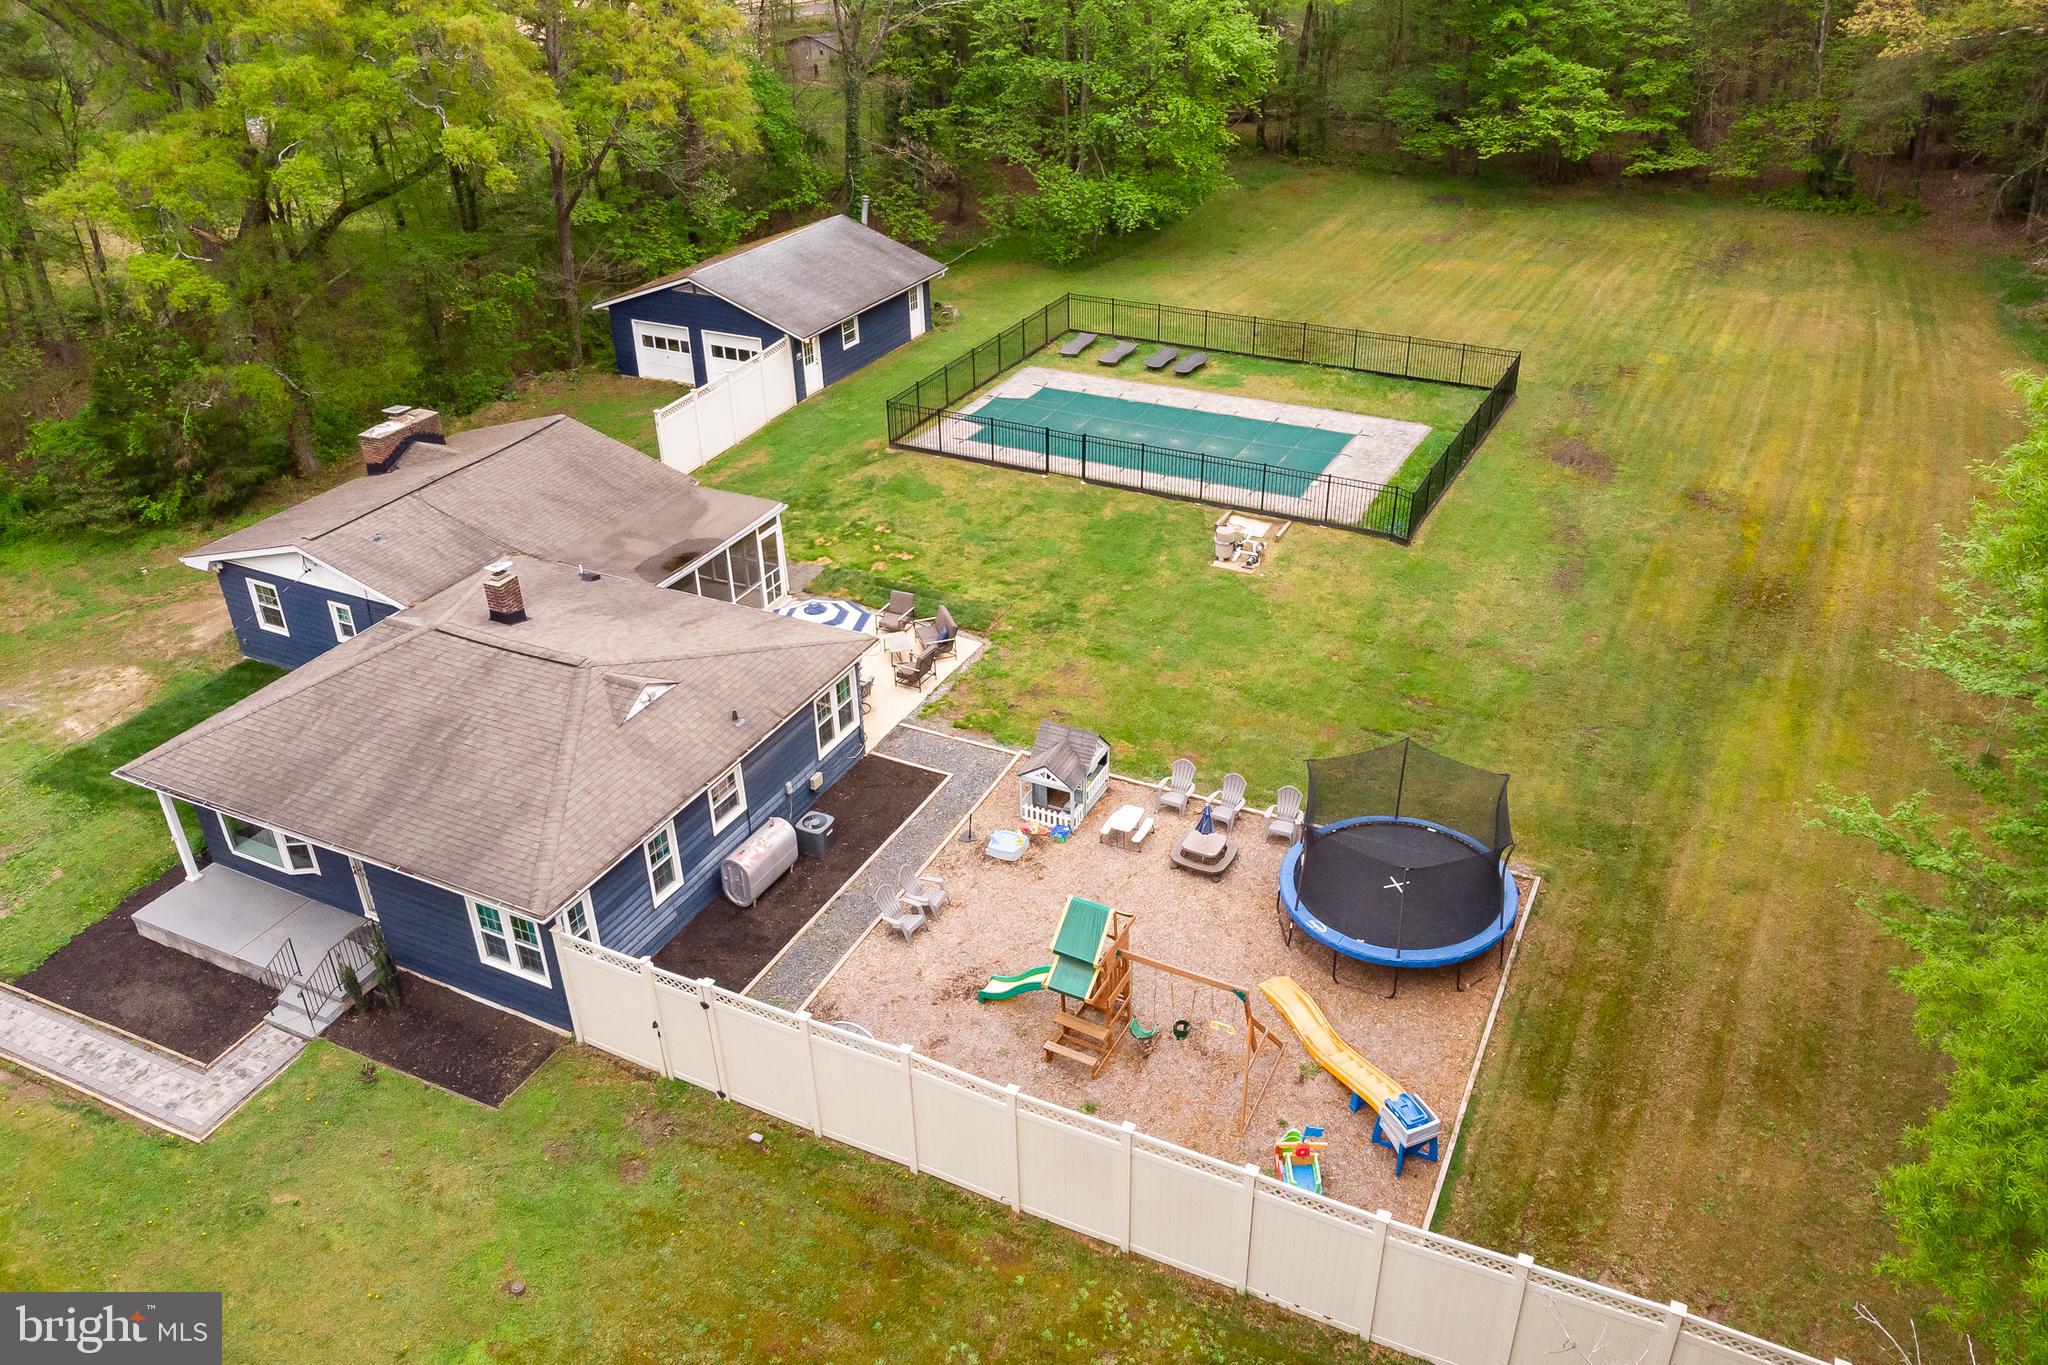 an aerial view of a house with swimming pool and big yard